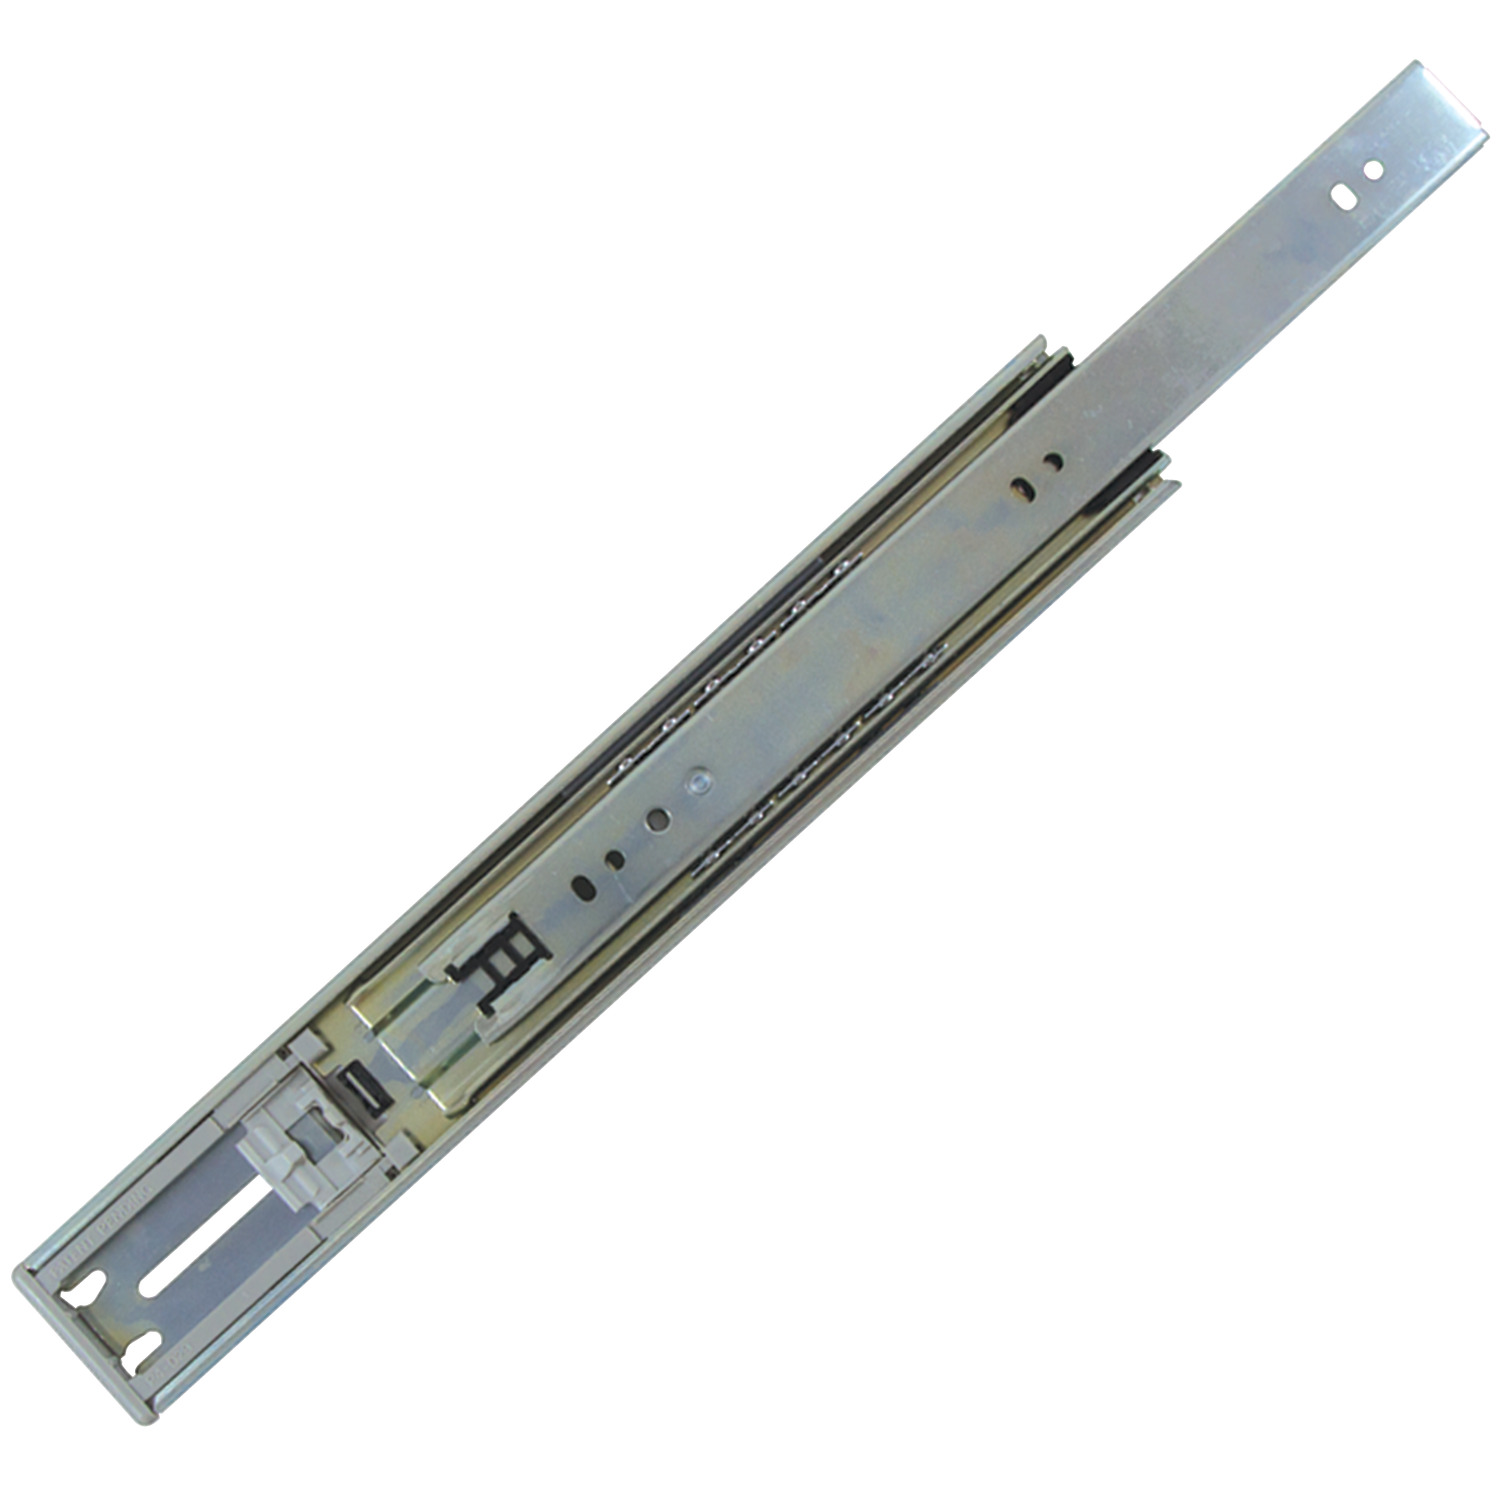 P4100.AC0400 Drawer Slide Full Extn Length 400; Load 45kg per pair. Sold Individually. Lever Disconnect; Soft Close